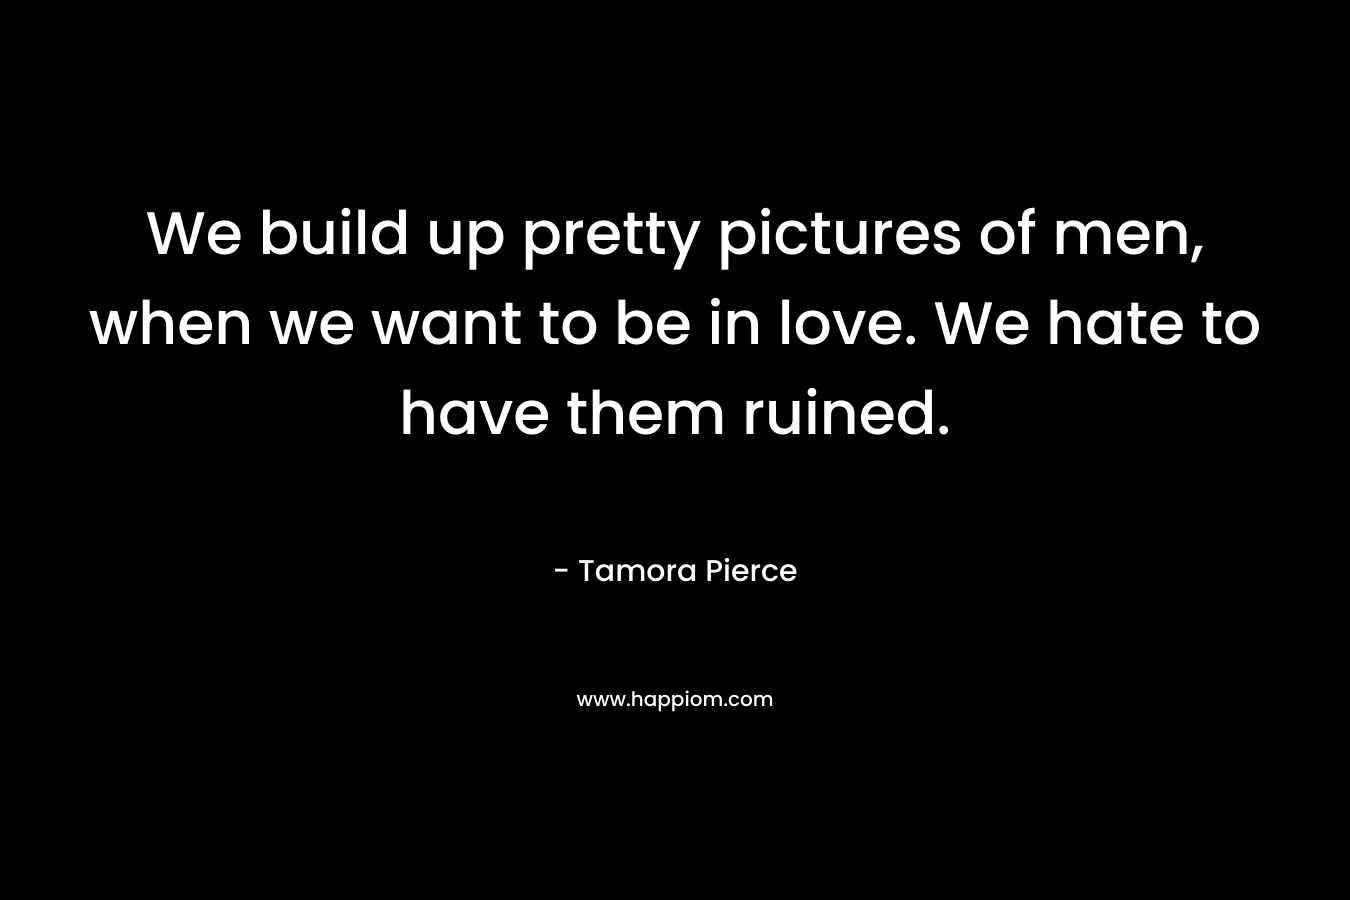 We build up pretty pictures of men, when we want to be in love. We hate to have them ruined. – Tamora Pierce